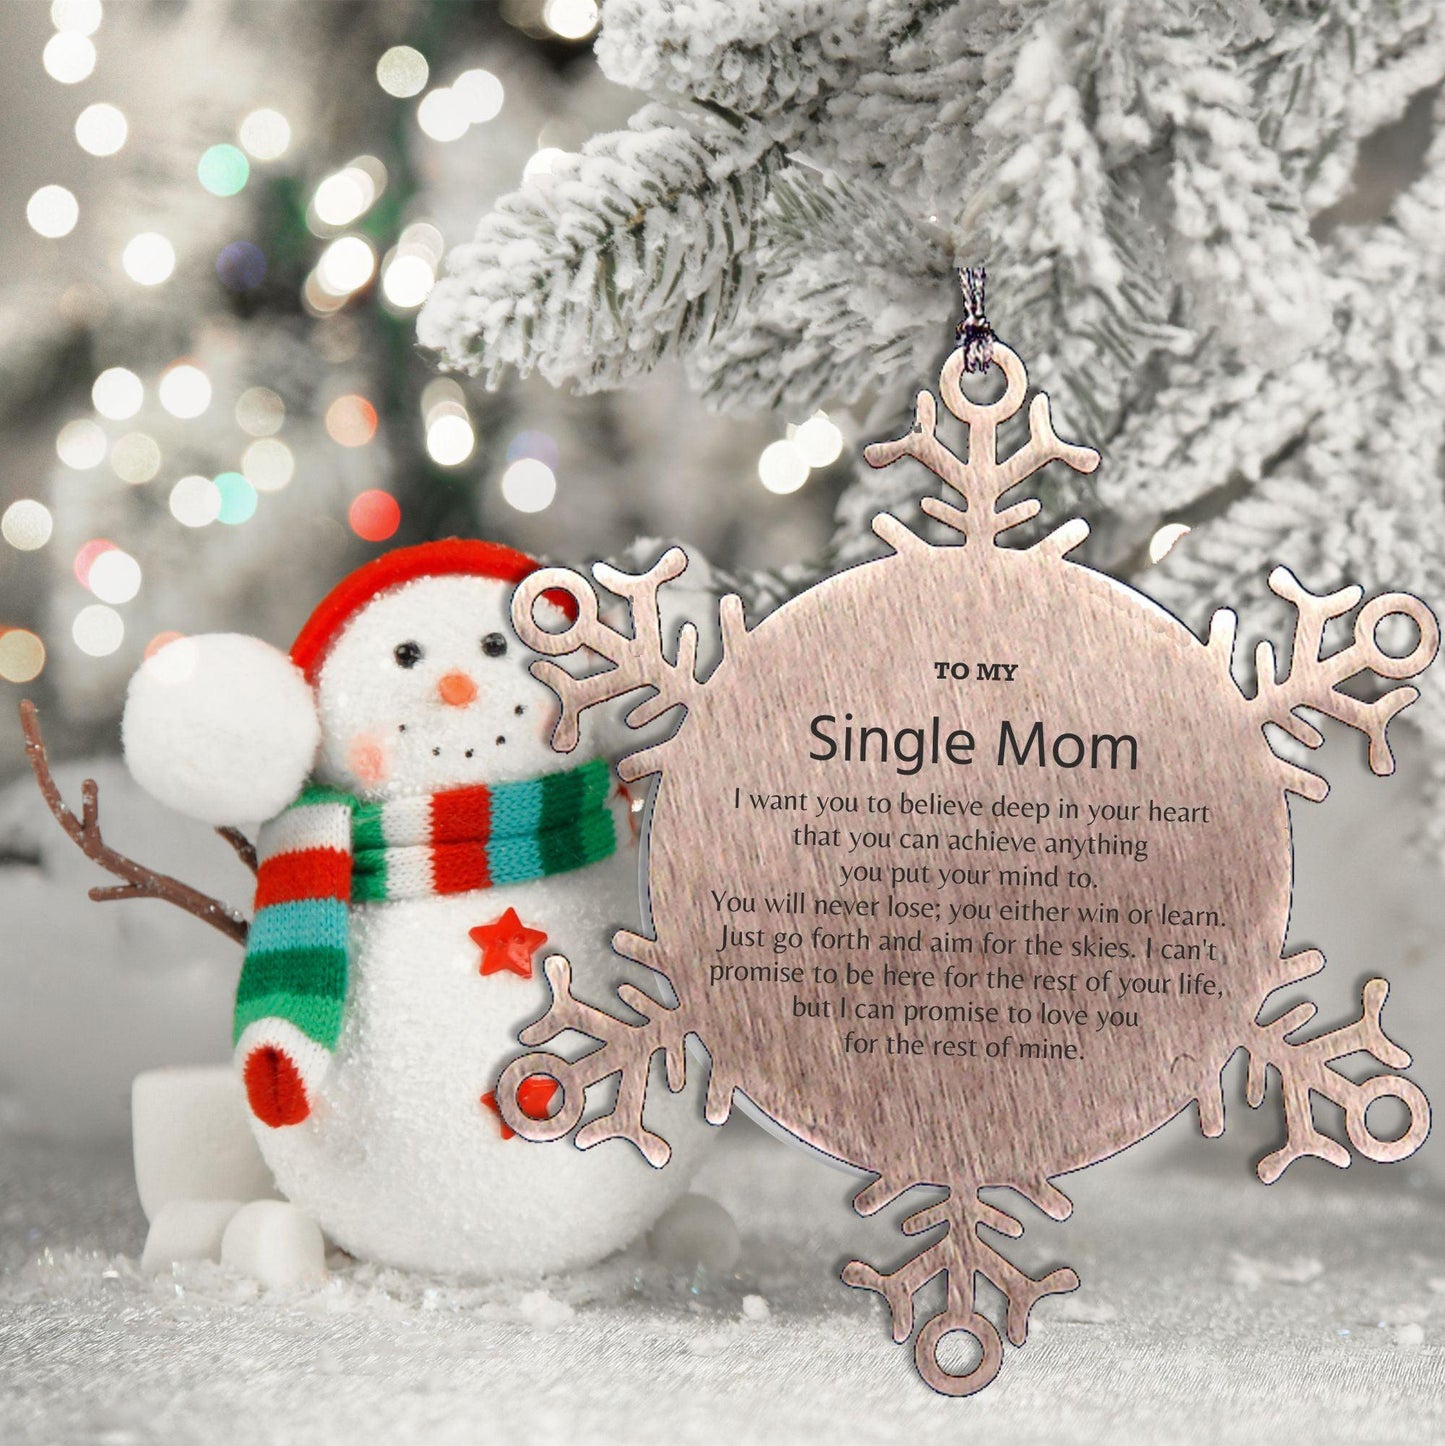 Motivational Single Mom Snowflake Ornament, Single Mom I can promise to love you for the rest of mine, Christmas Birthday Gift - Mallard Moon Gift Shop